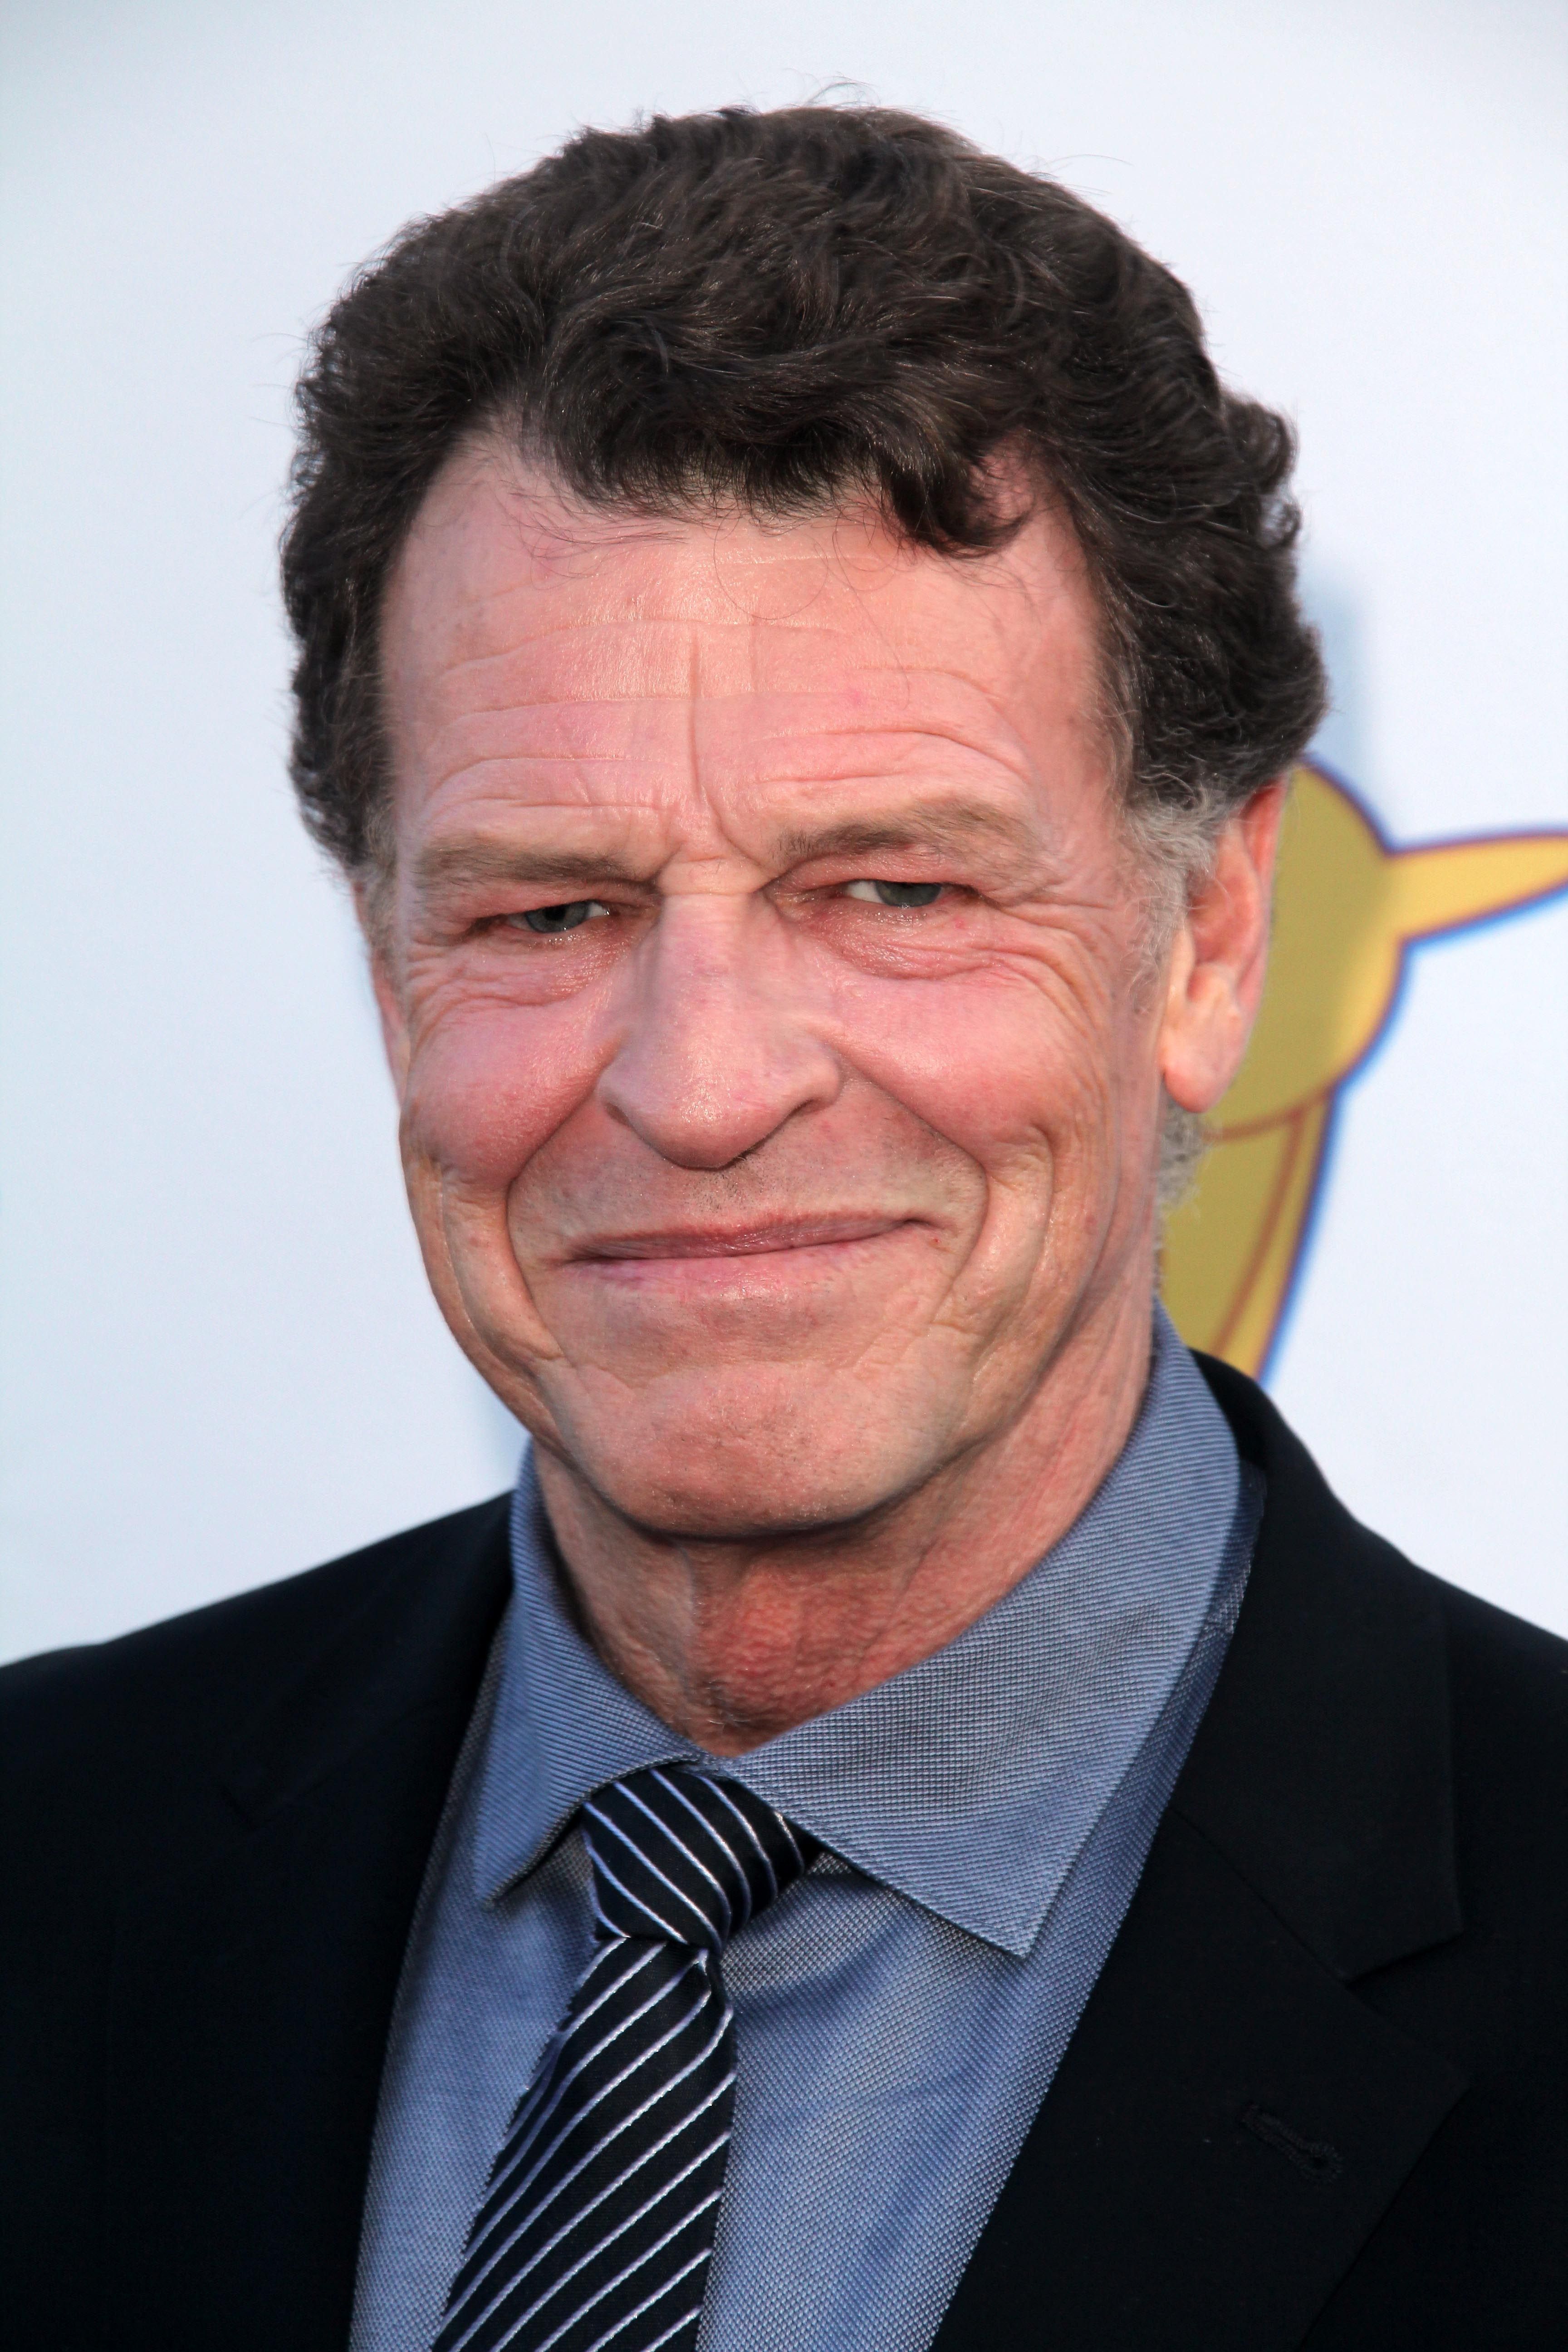 John Noble  wears a striped tie and blue shirt.